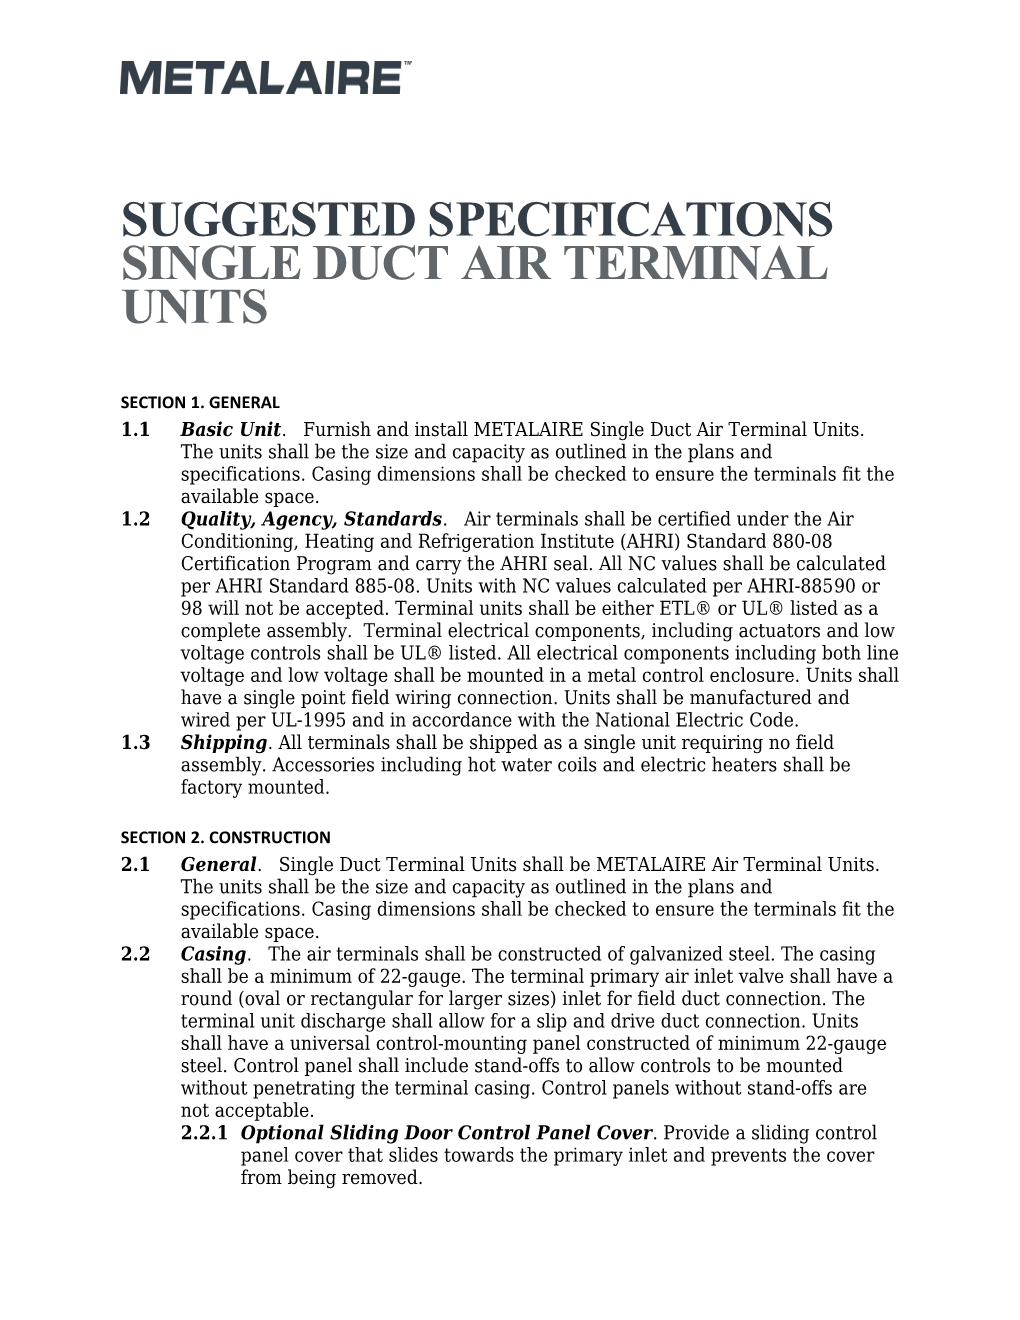 Suggested Specifications Single Ductair Terminalunits